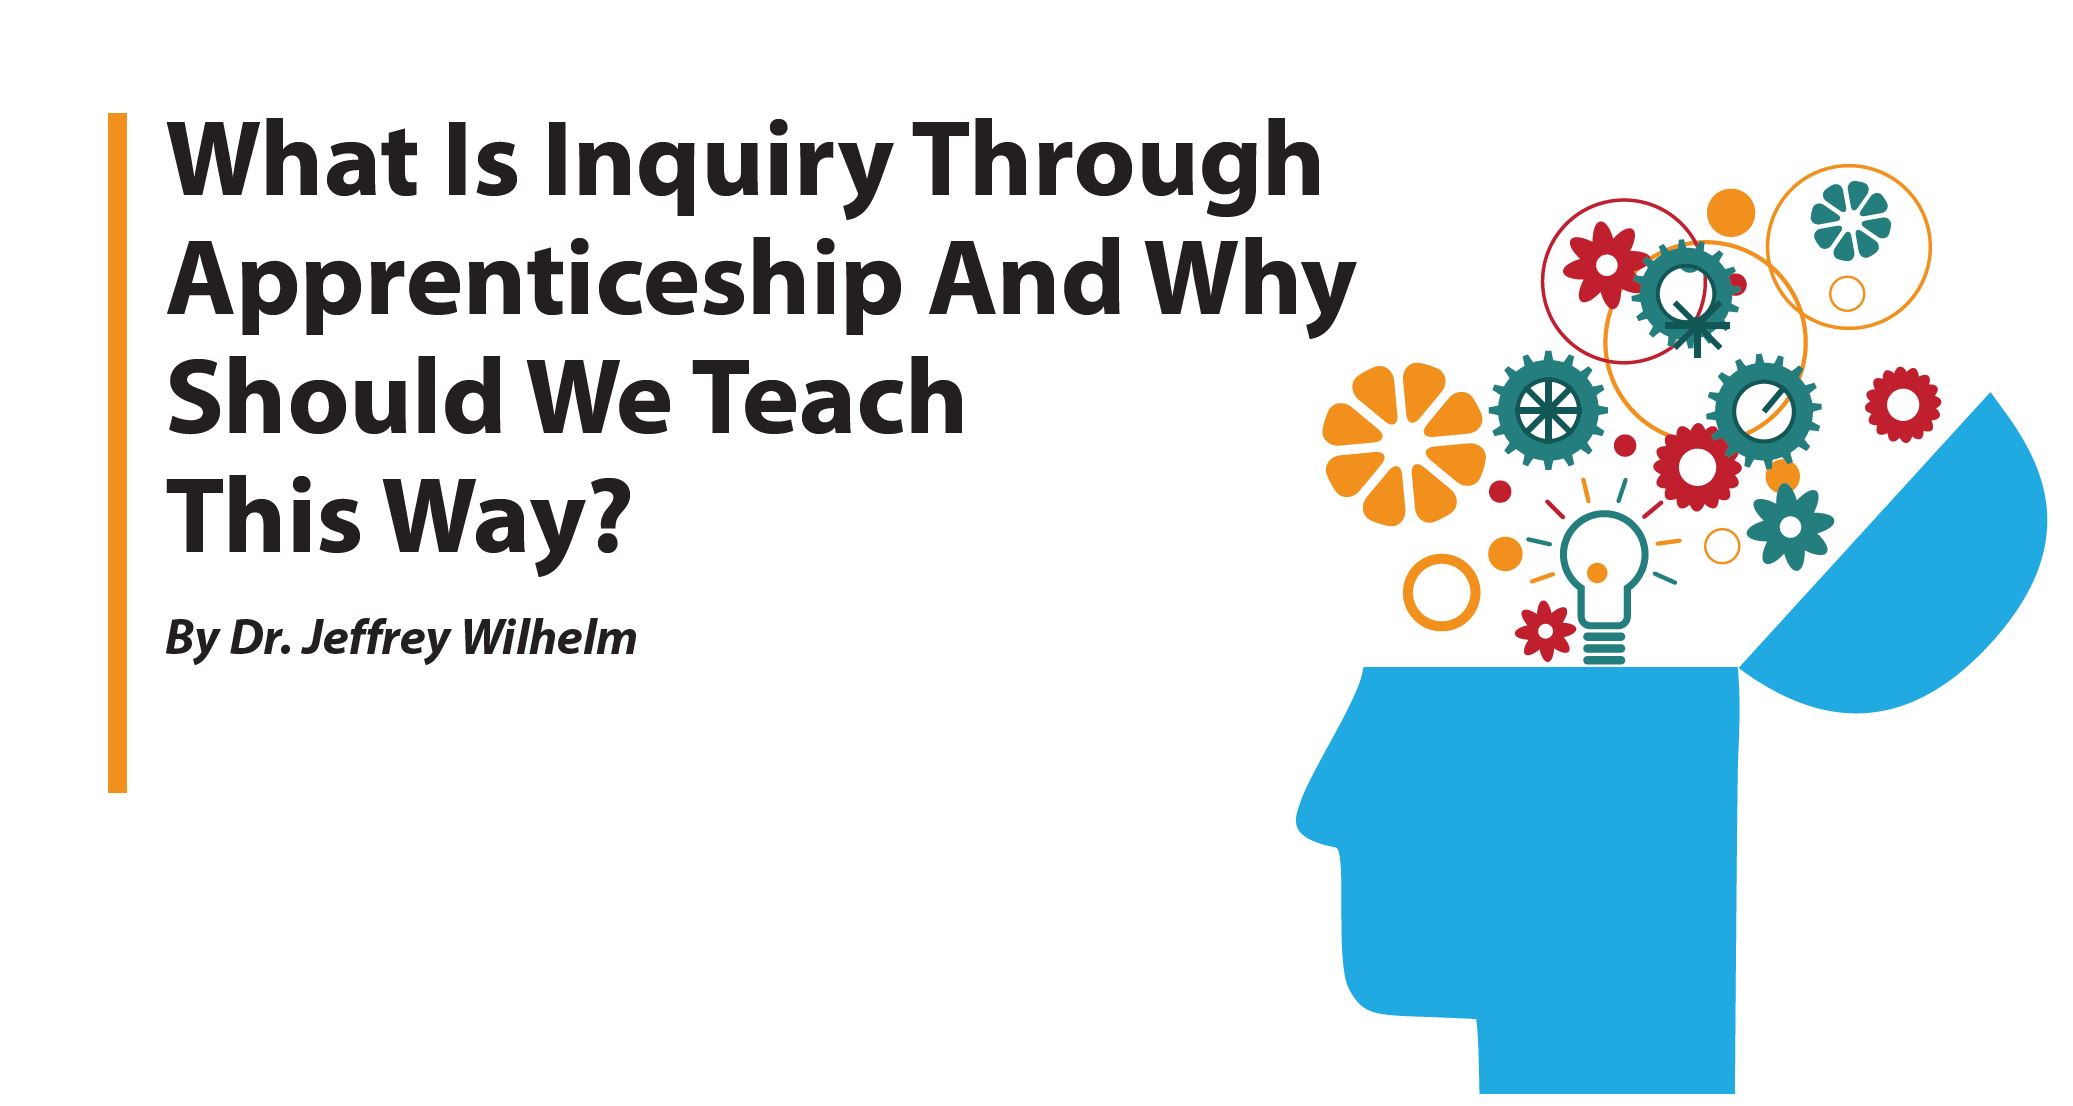 What Is Inquiry Through Apprenticeship And Why Should We Teach This Way?